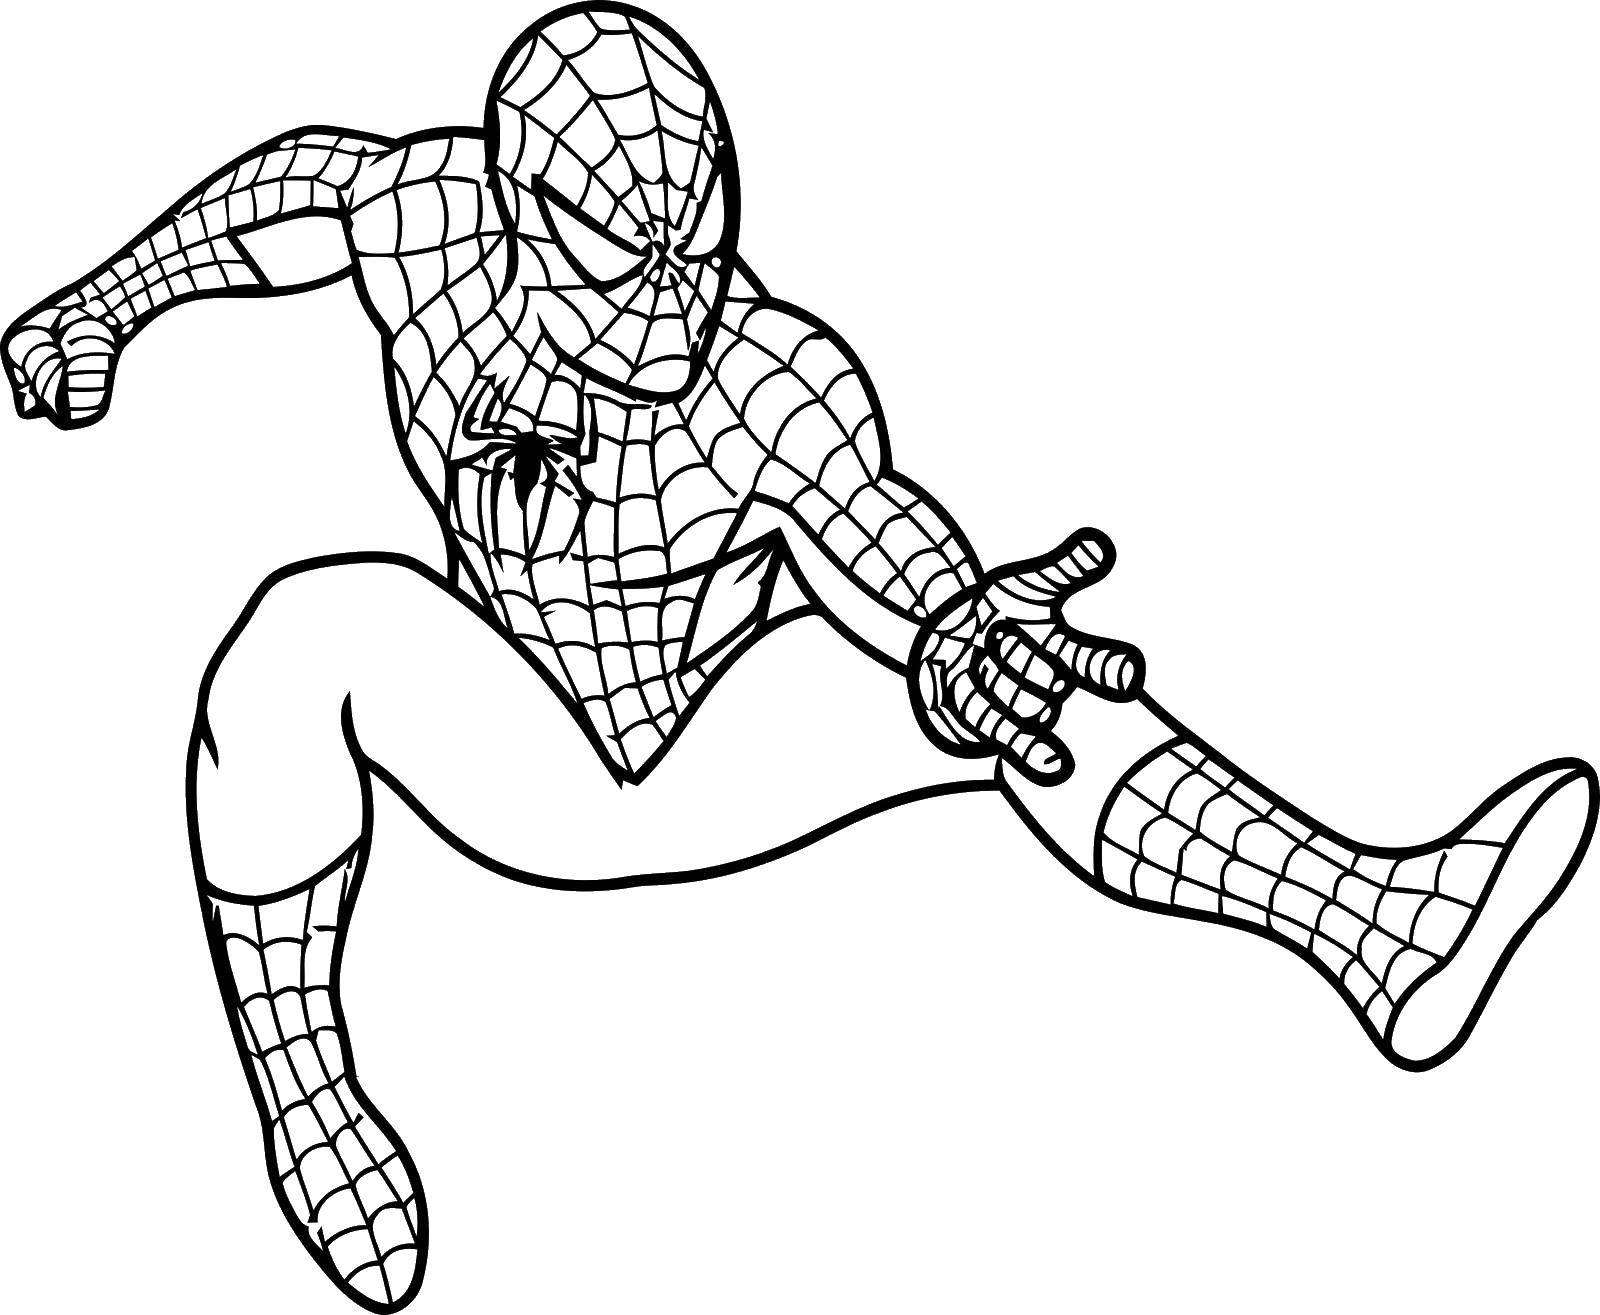 Coloring Ready to fight. Category Comics. Tags:  Comics, Spider-Man, Spider-Man.